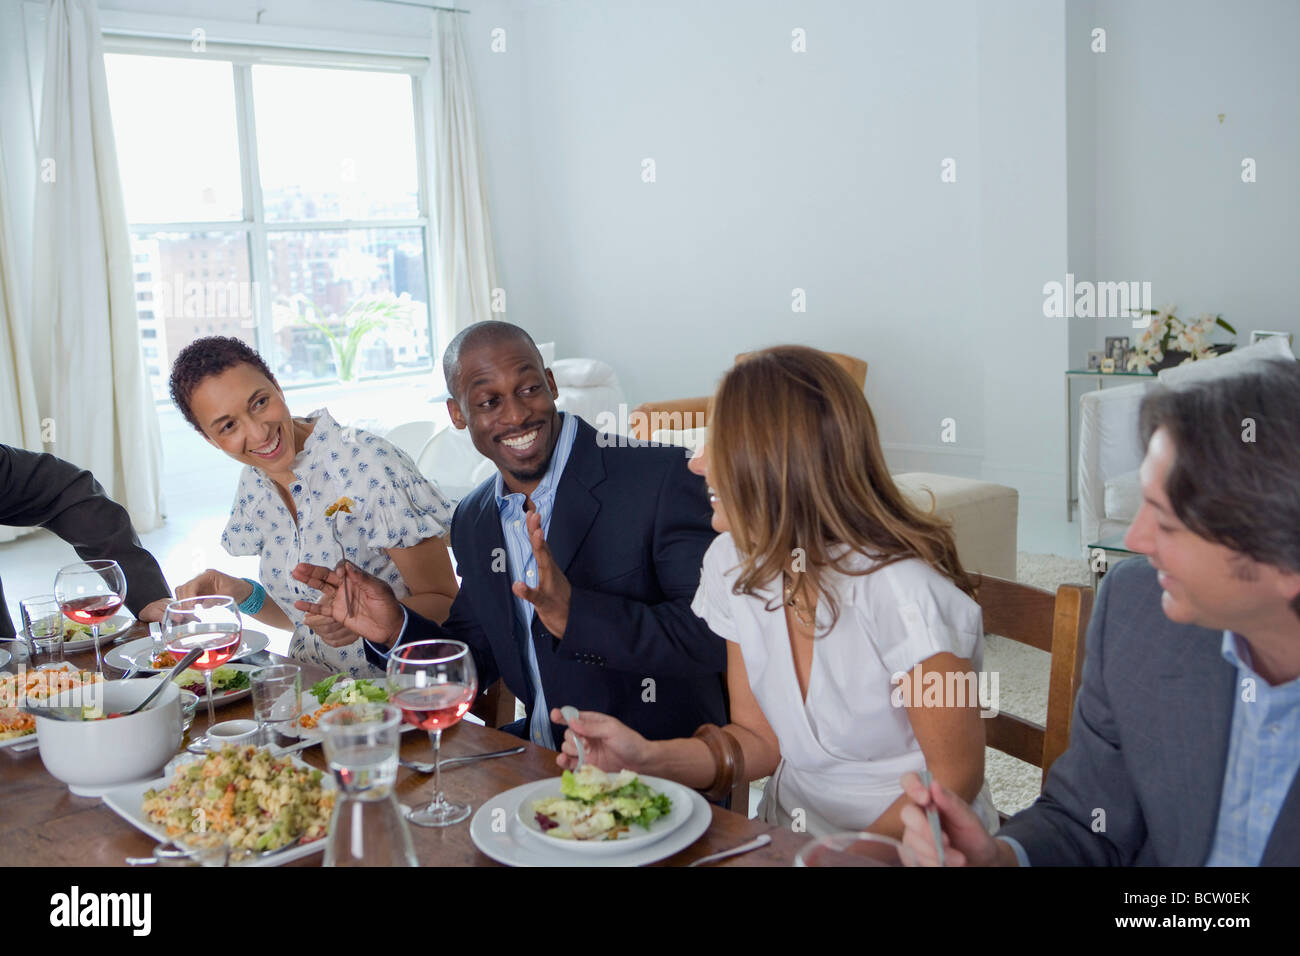 Close-up of two men and two women sitting at a dining table Stock Photo